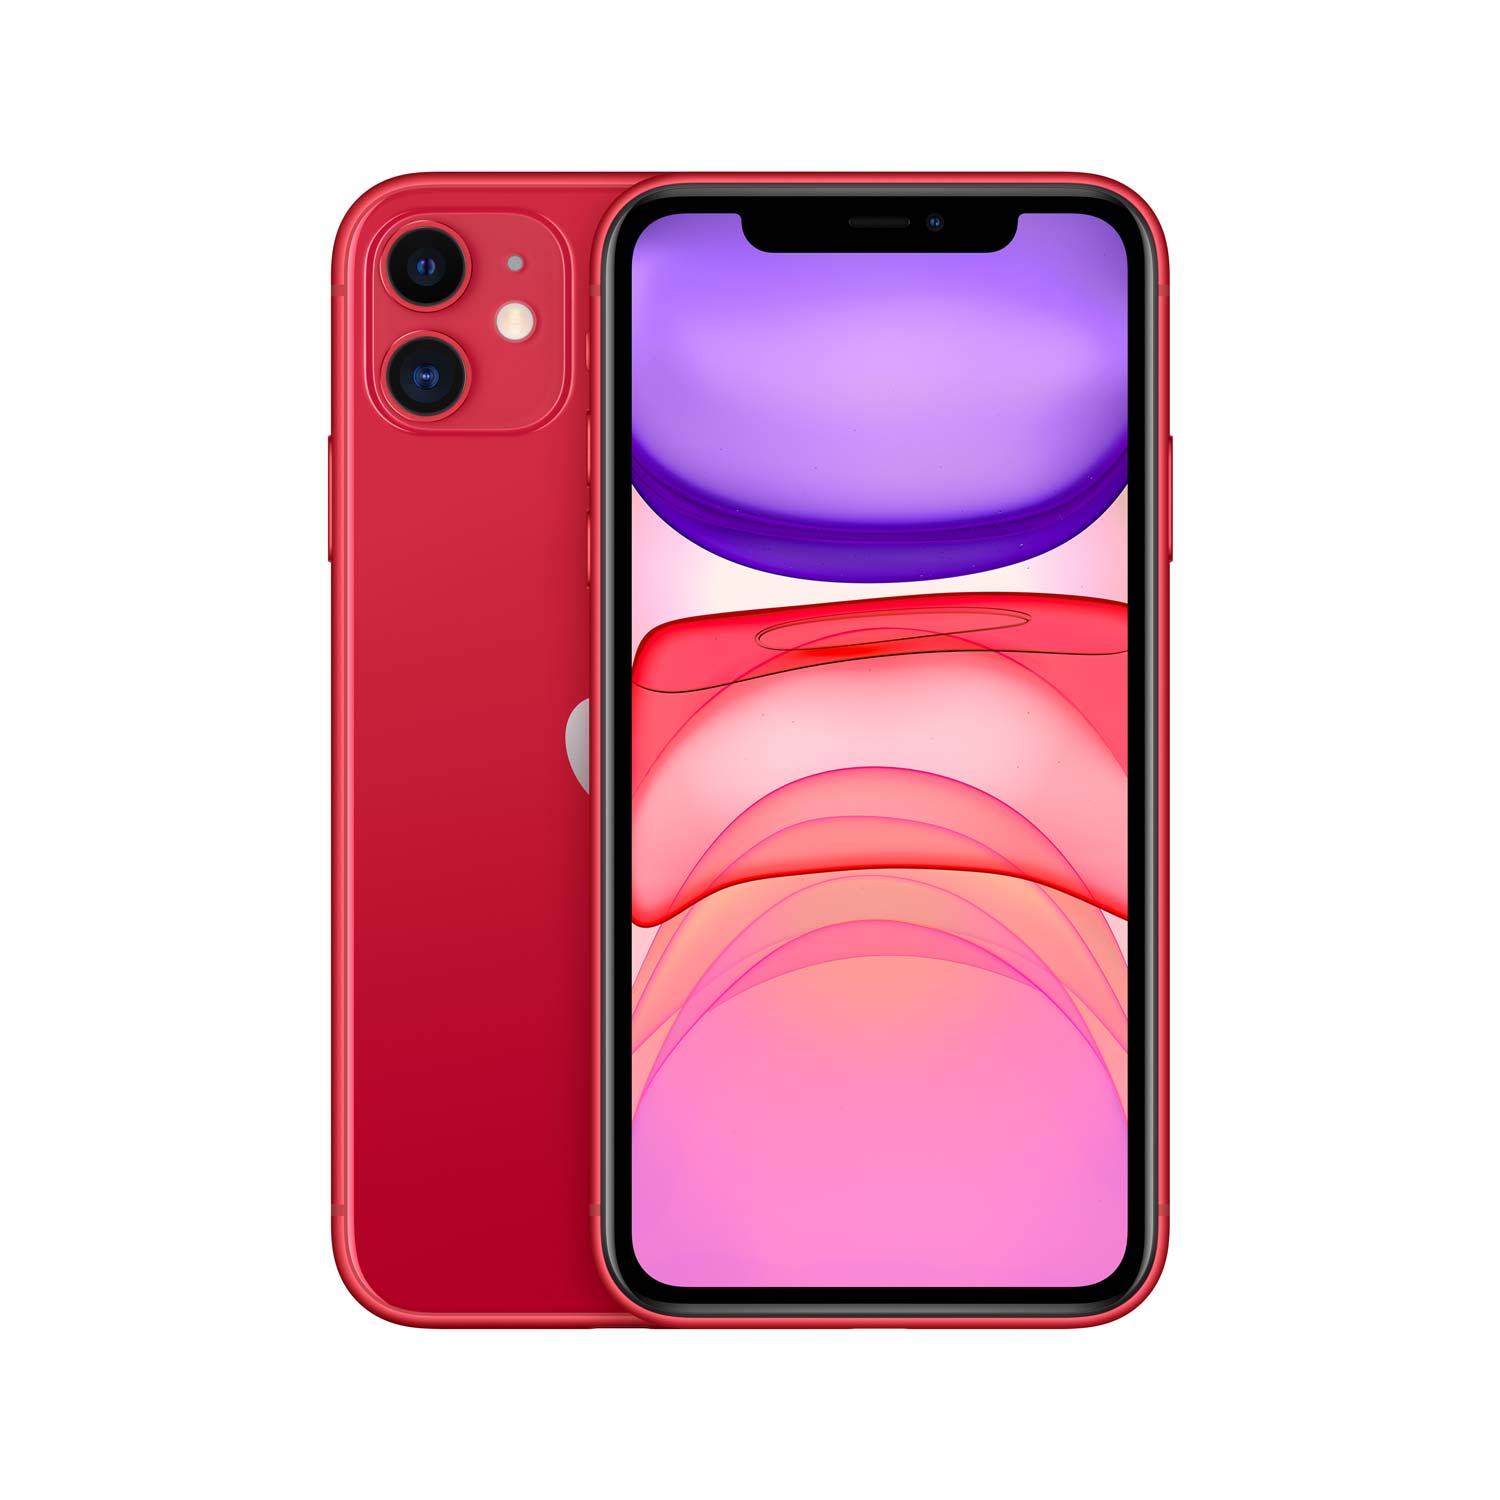 Apple iPhone 11 - (PRODUCT) RED - 64GB